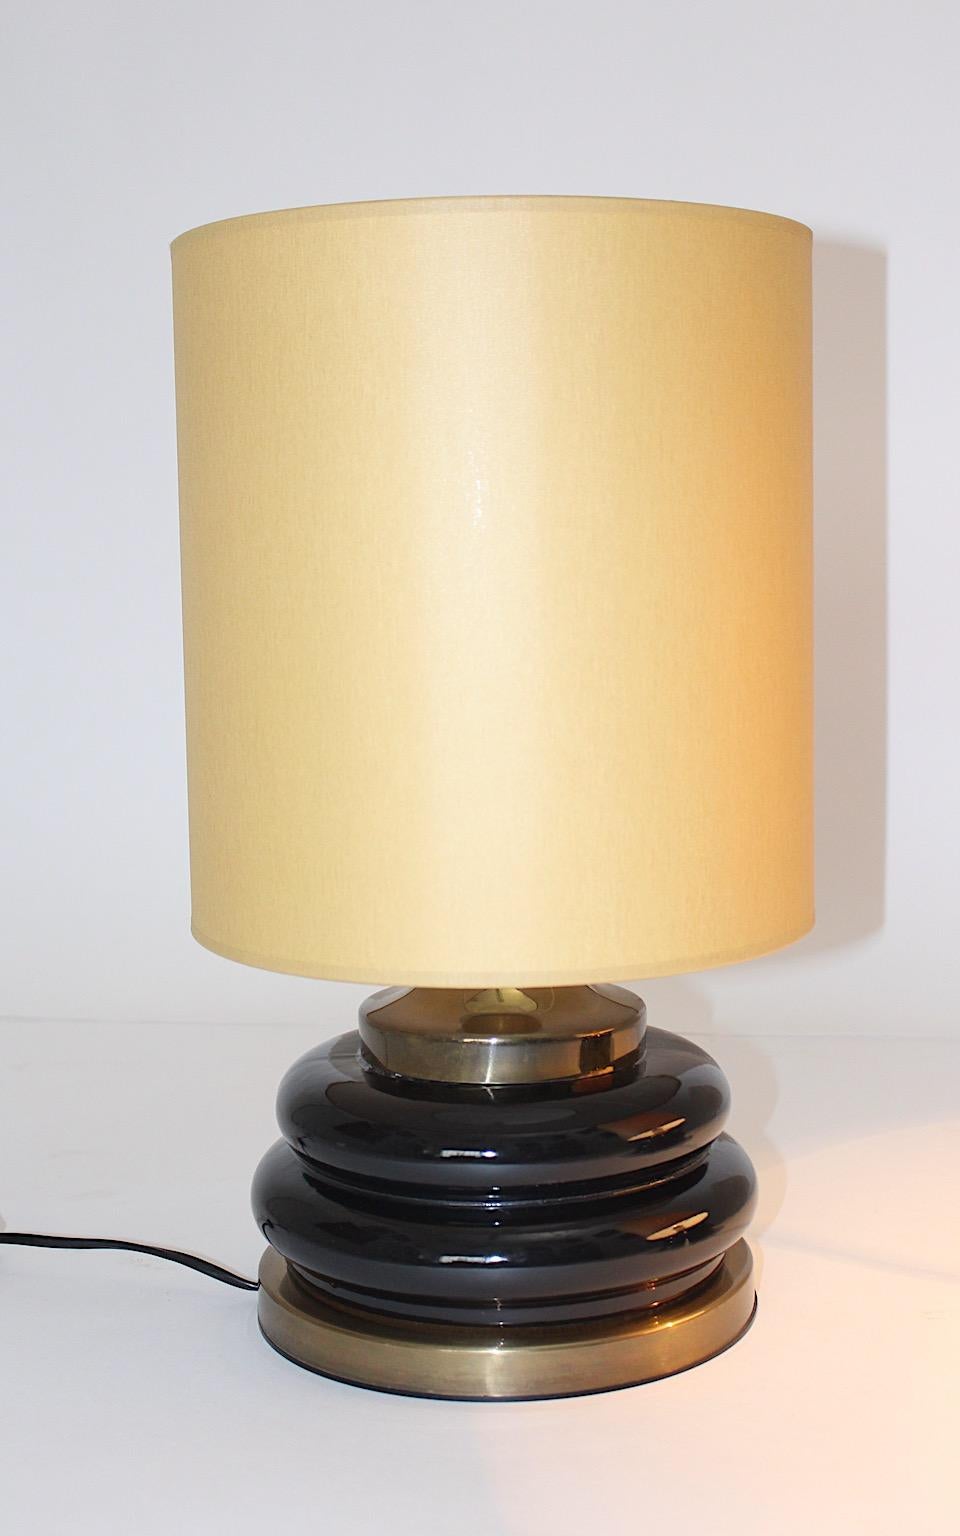 Modernist Brown Gold Glass Vintage Table Lamps Pair Duo, 1970s, Italy For Sale 3